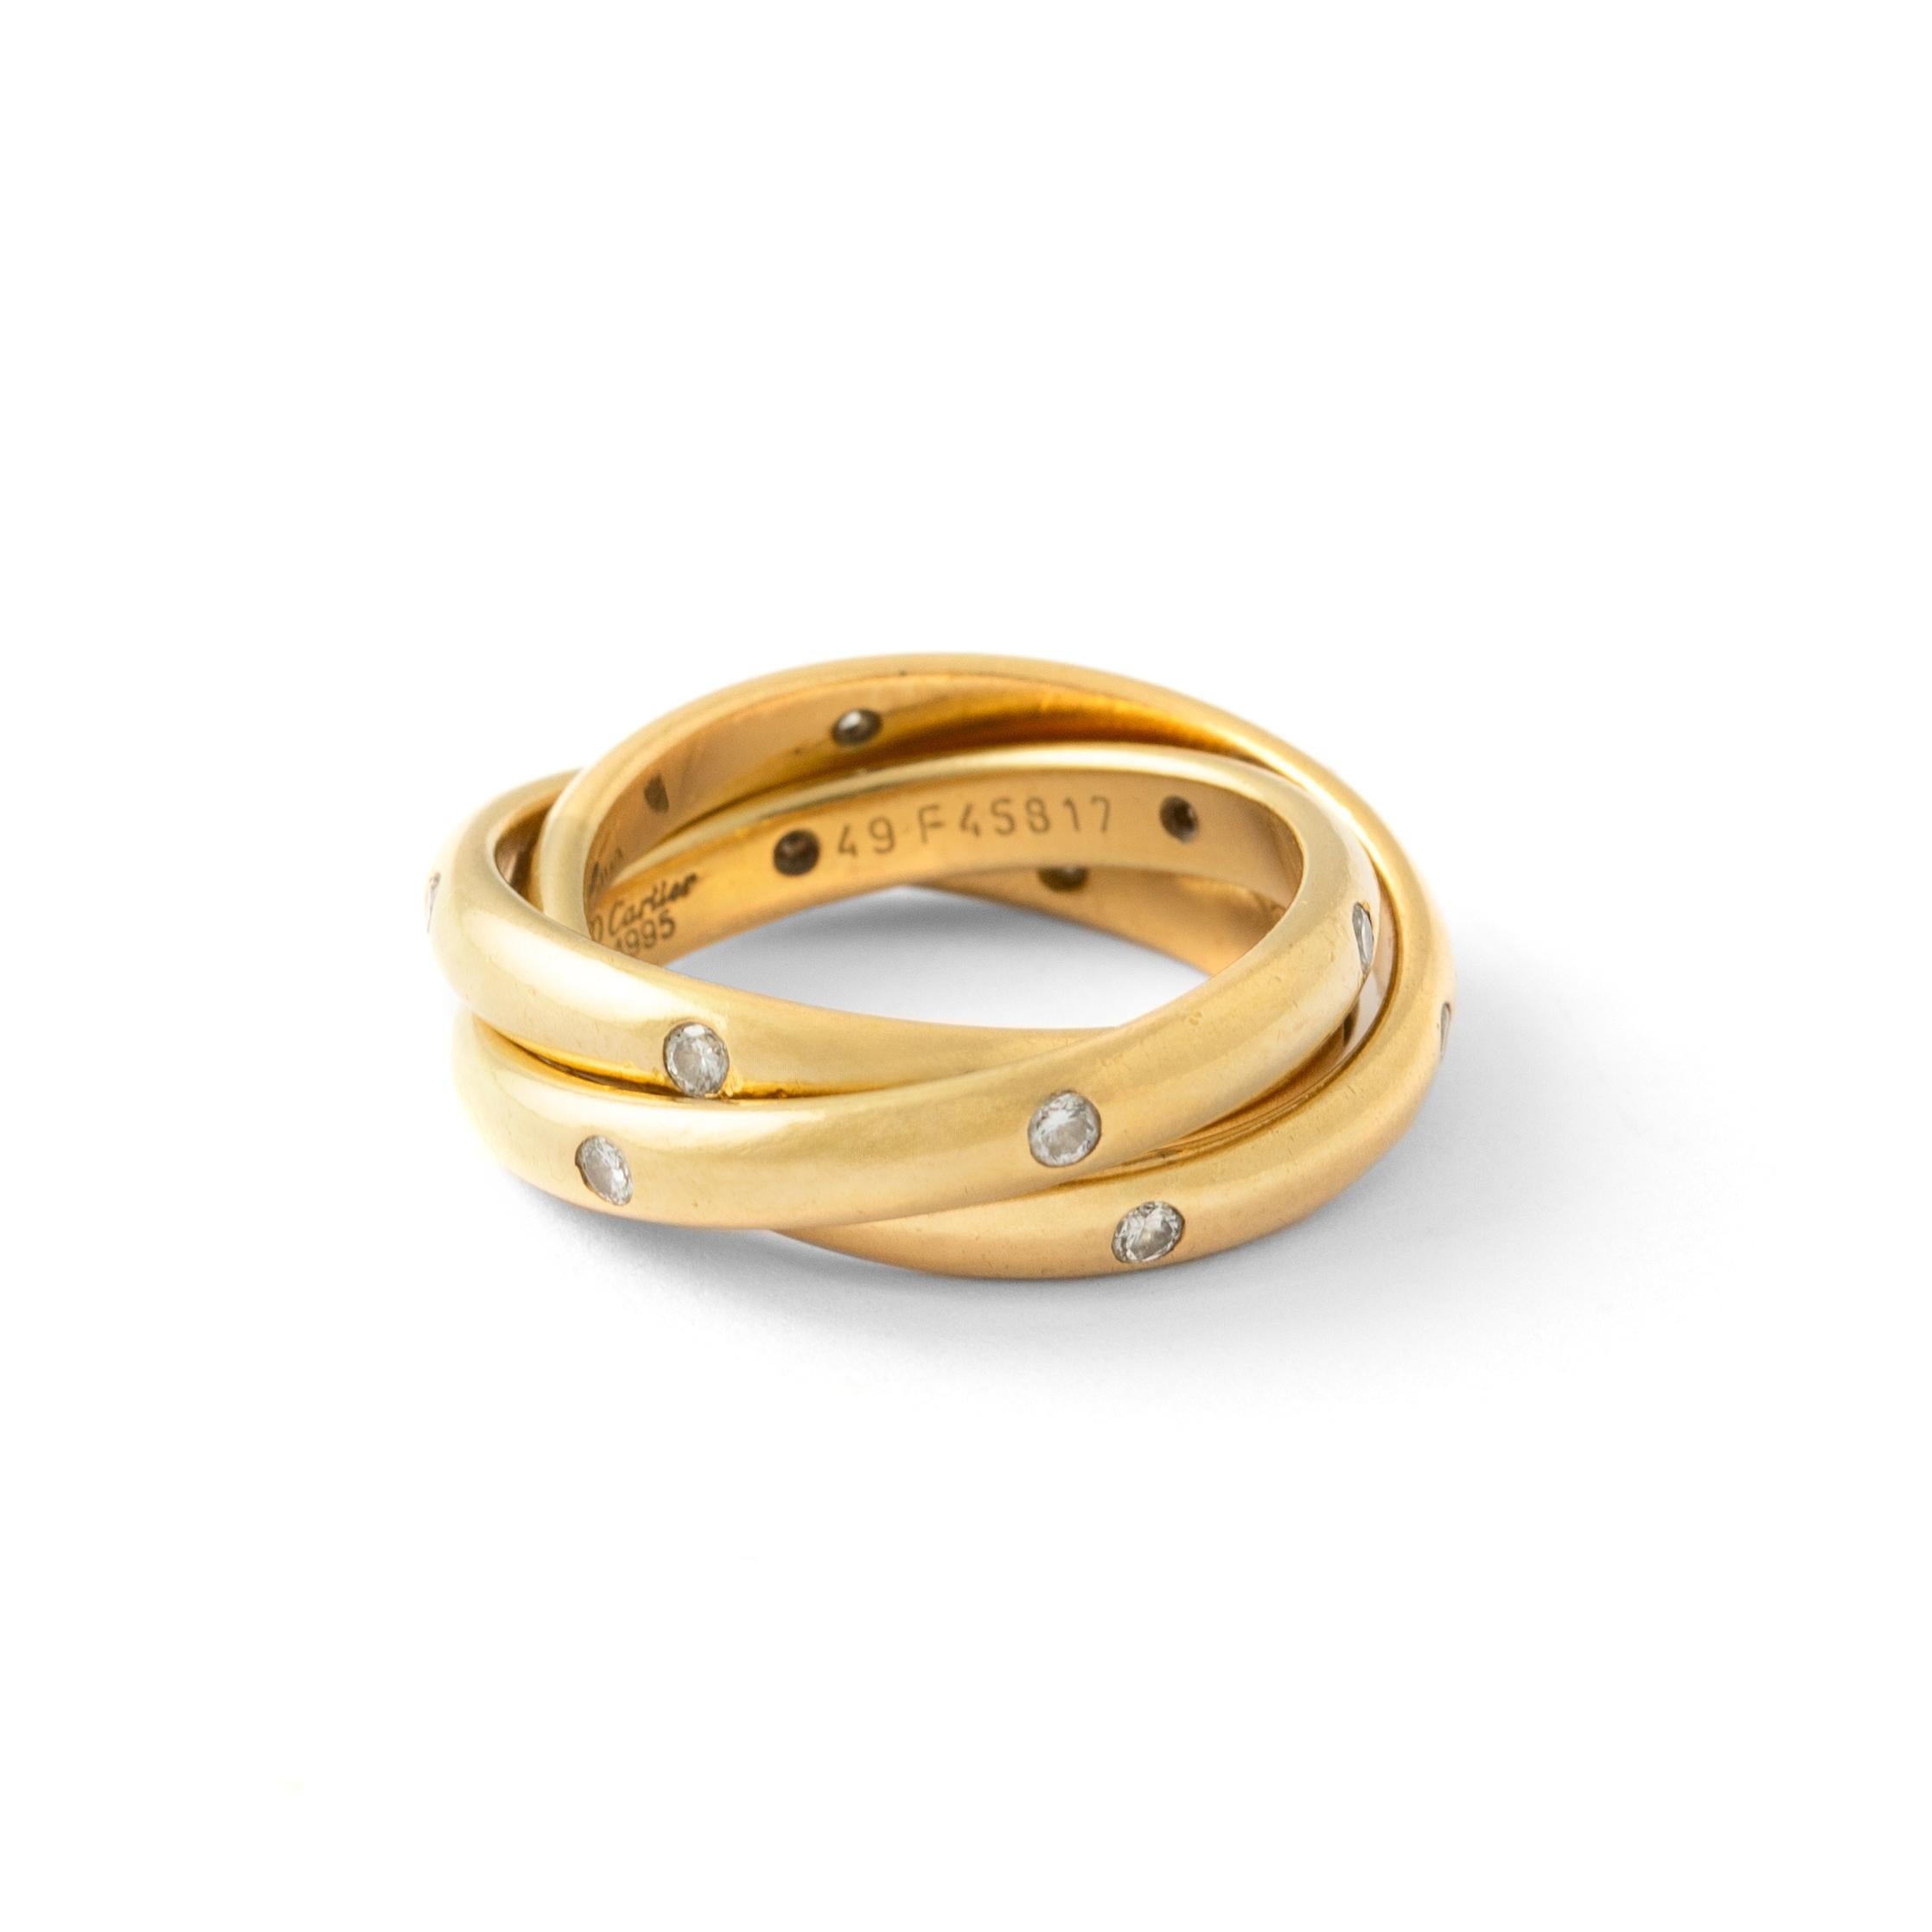 Cartier Constellation Diamond Yellow Gold Trinity Band Ring

This fabulous ring from Cartier's Constellation Trinity collection features 3 interconnected 4.0mm bands crafted in 18k yellow gold and set with round brilliant D-F VVS1-VVS2 diamonds